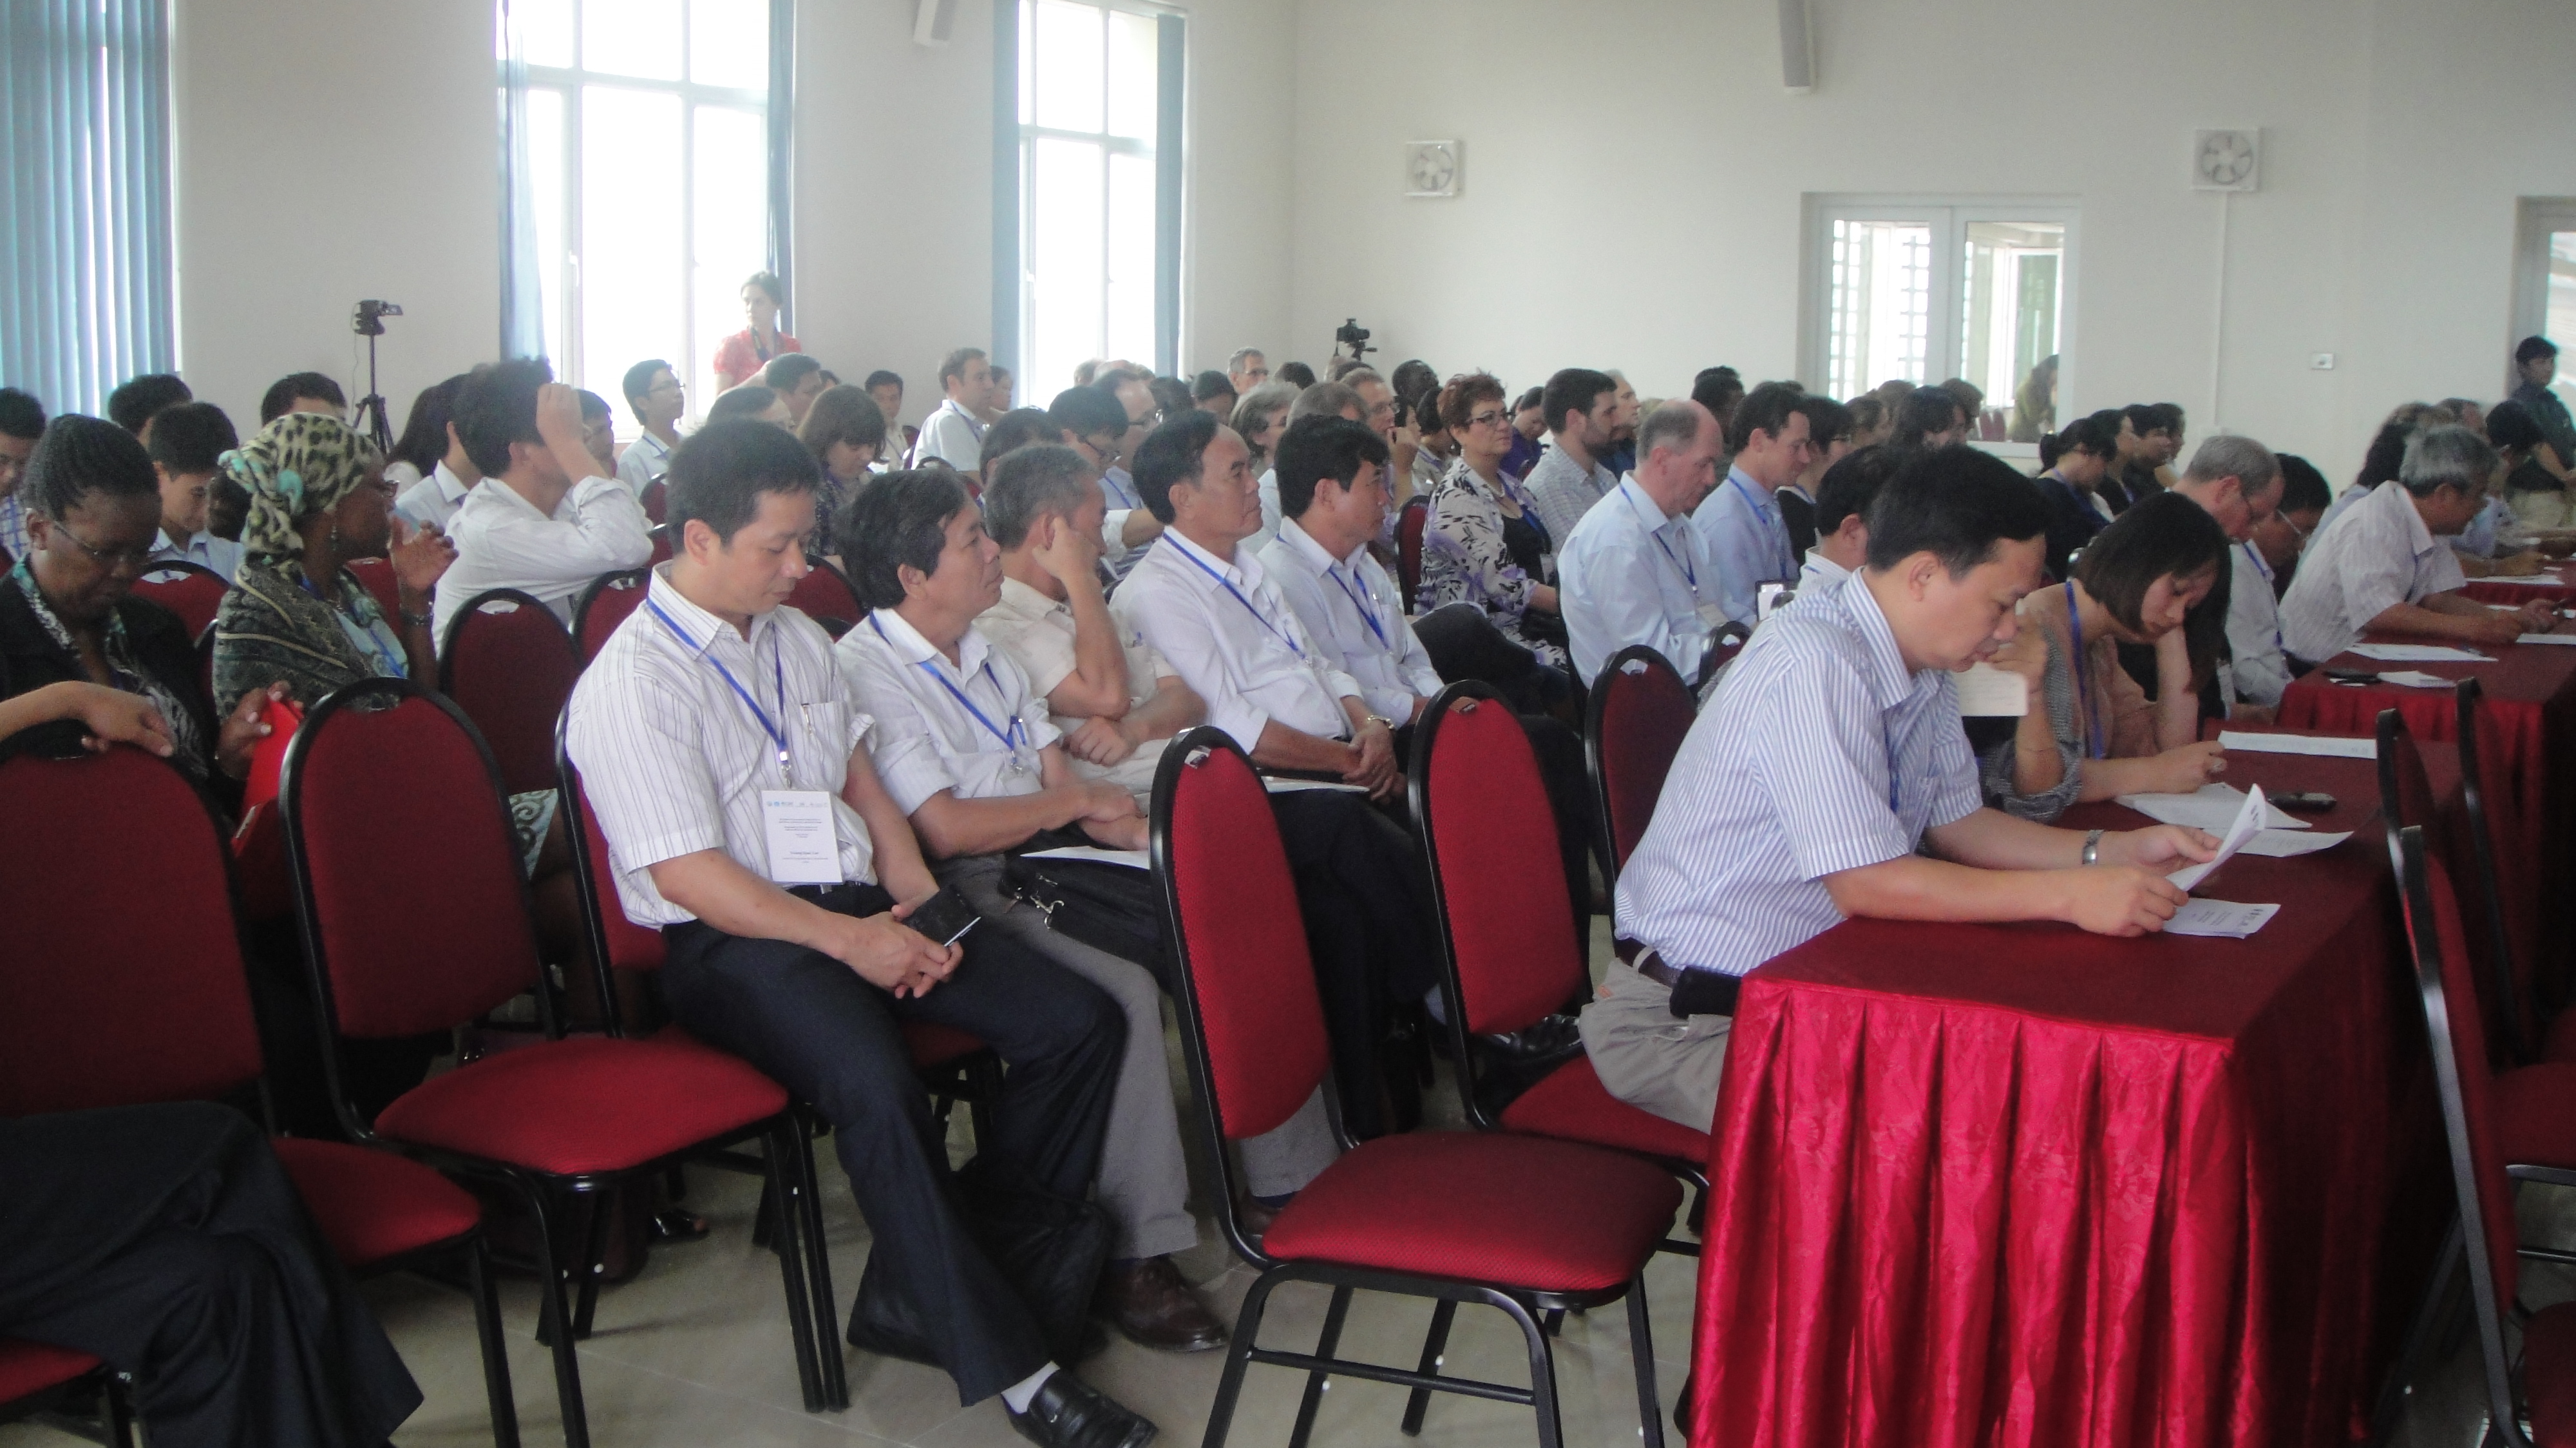 Over 100 participants attended the inauguration ceremony and stakeholders workshop